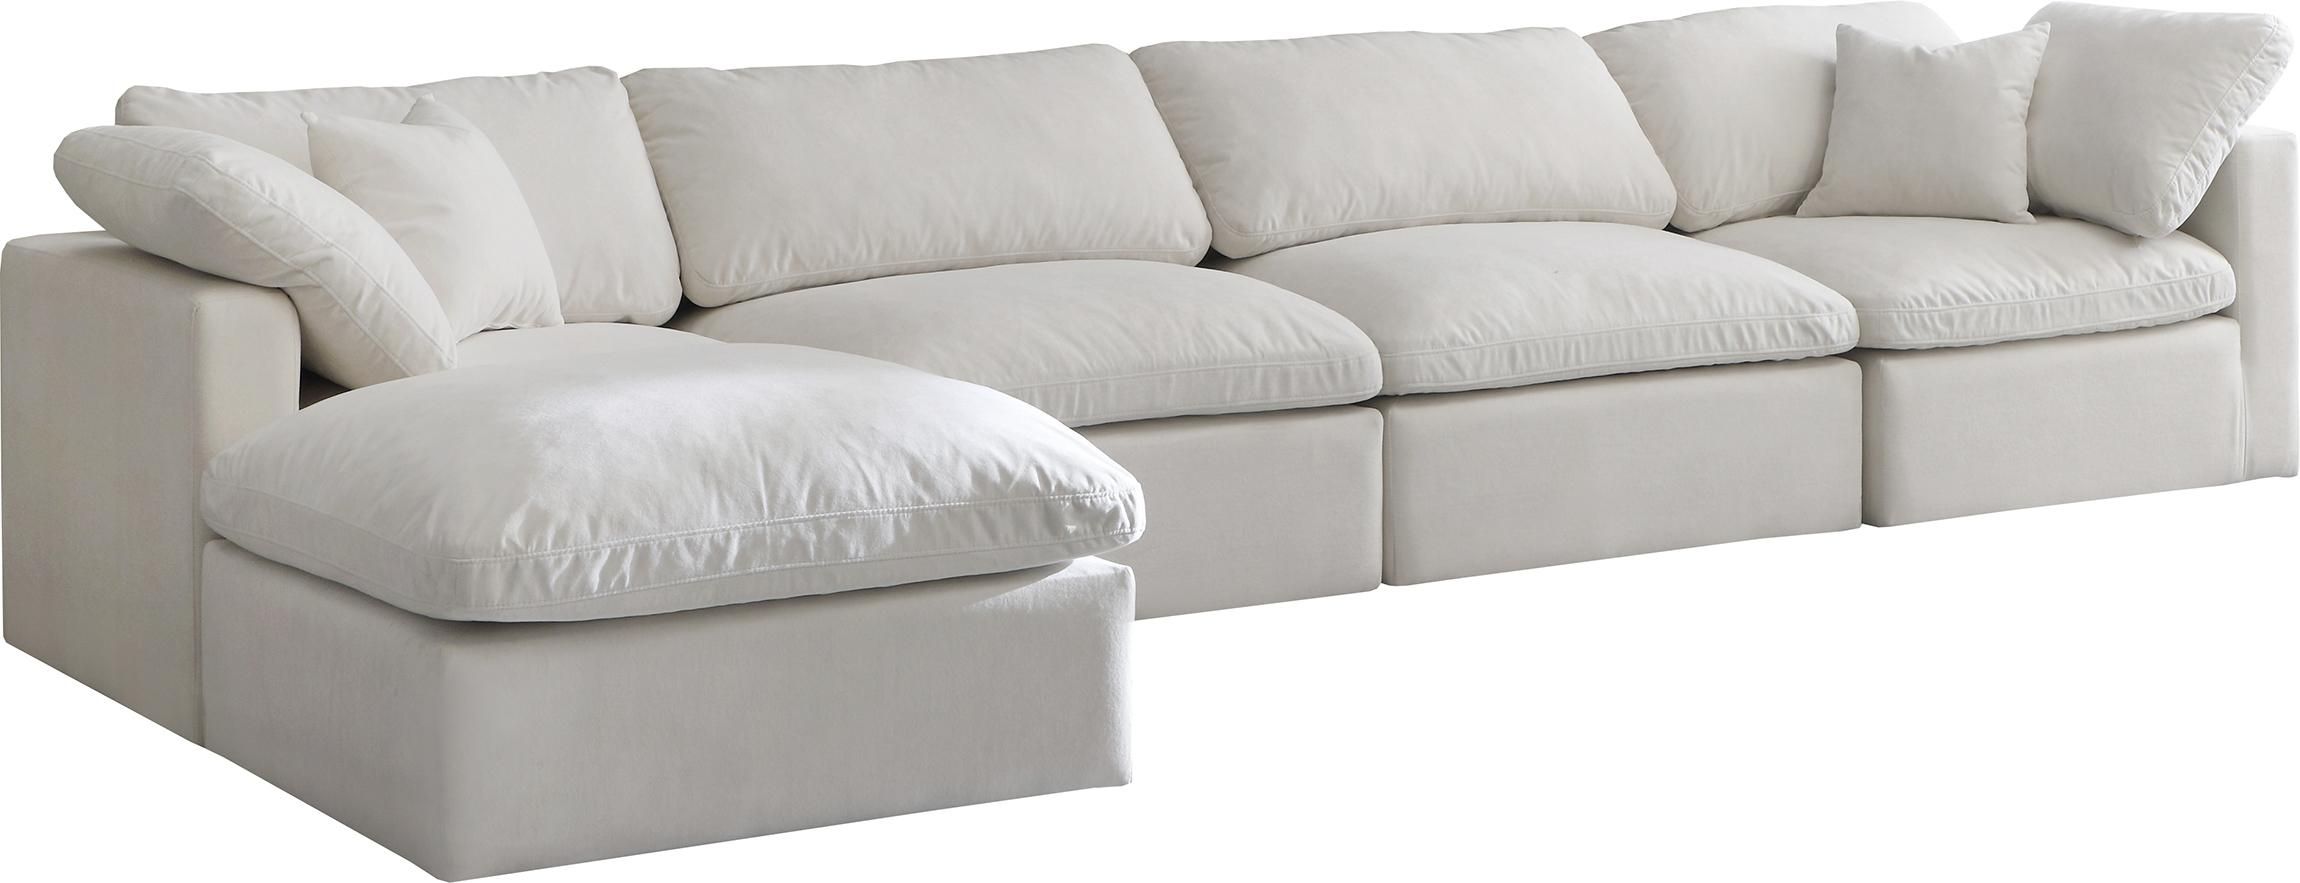 Cream Velvet Cloud 5a Modular Down Filled Reversible Sectional Soflex  Modern – Buy Online On Ny Furniture Outlet Within Cream Velvet Modular Sectionals (View 4 of 15)